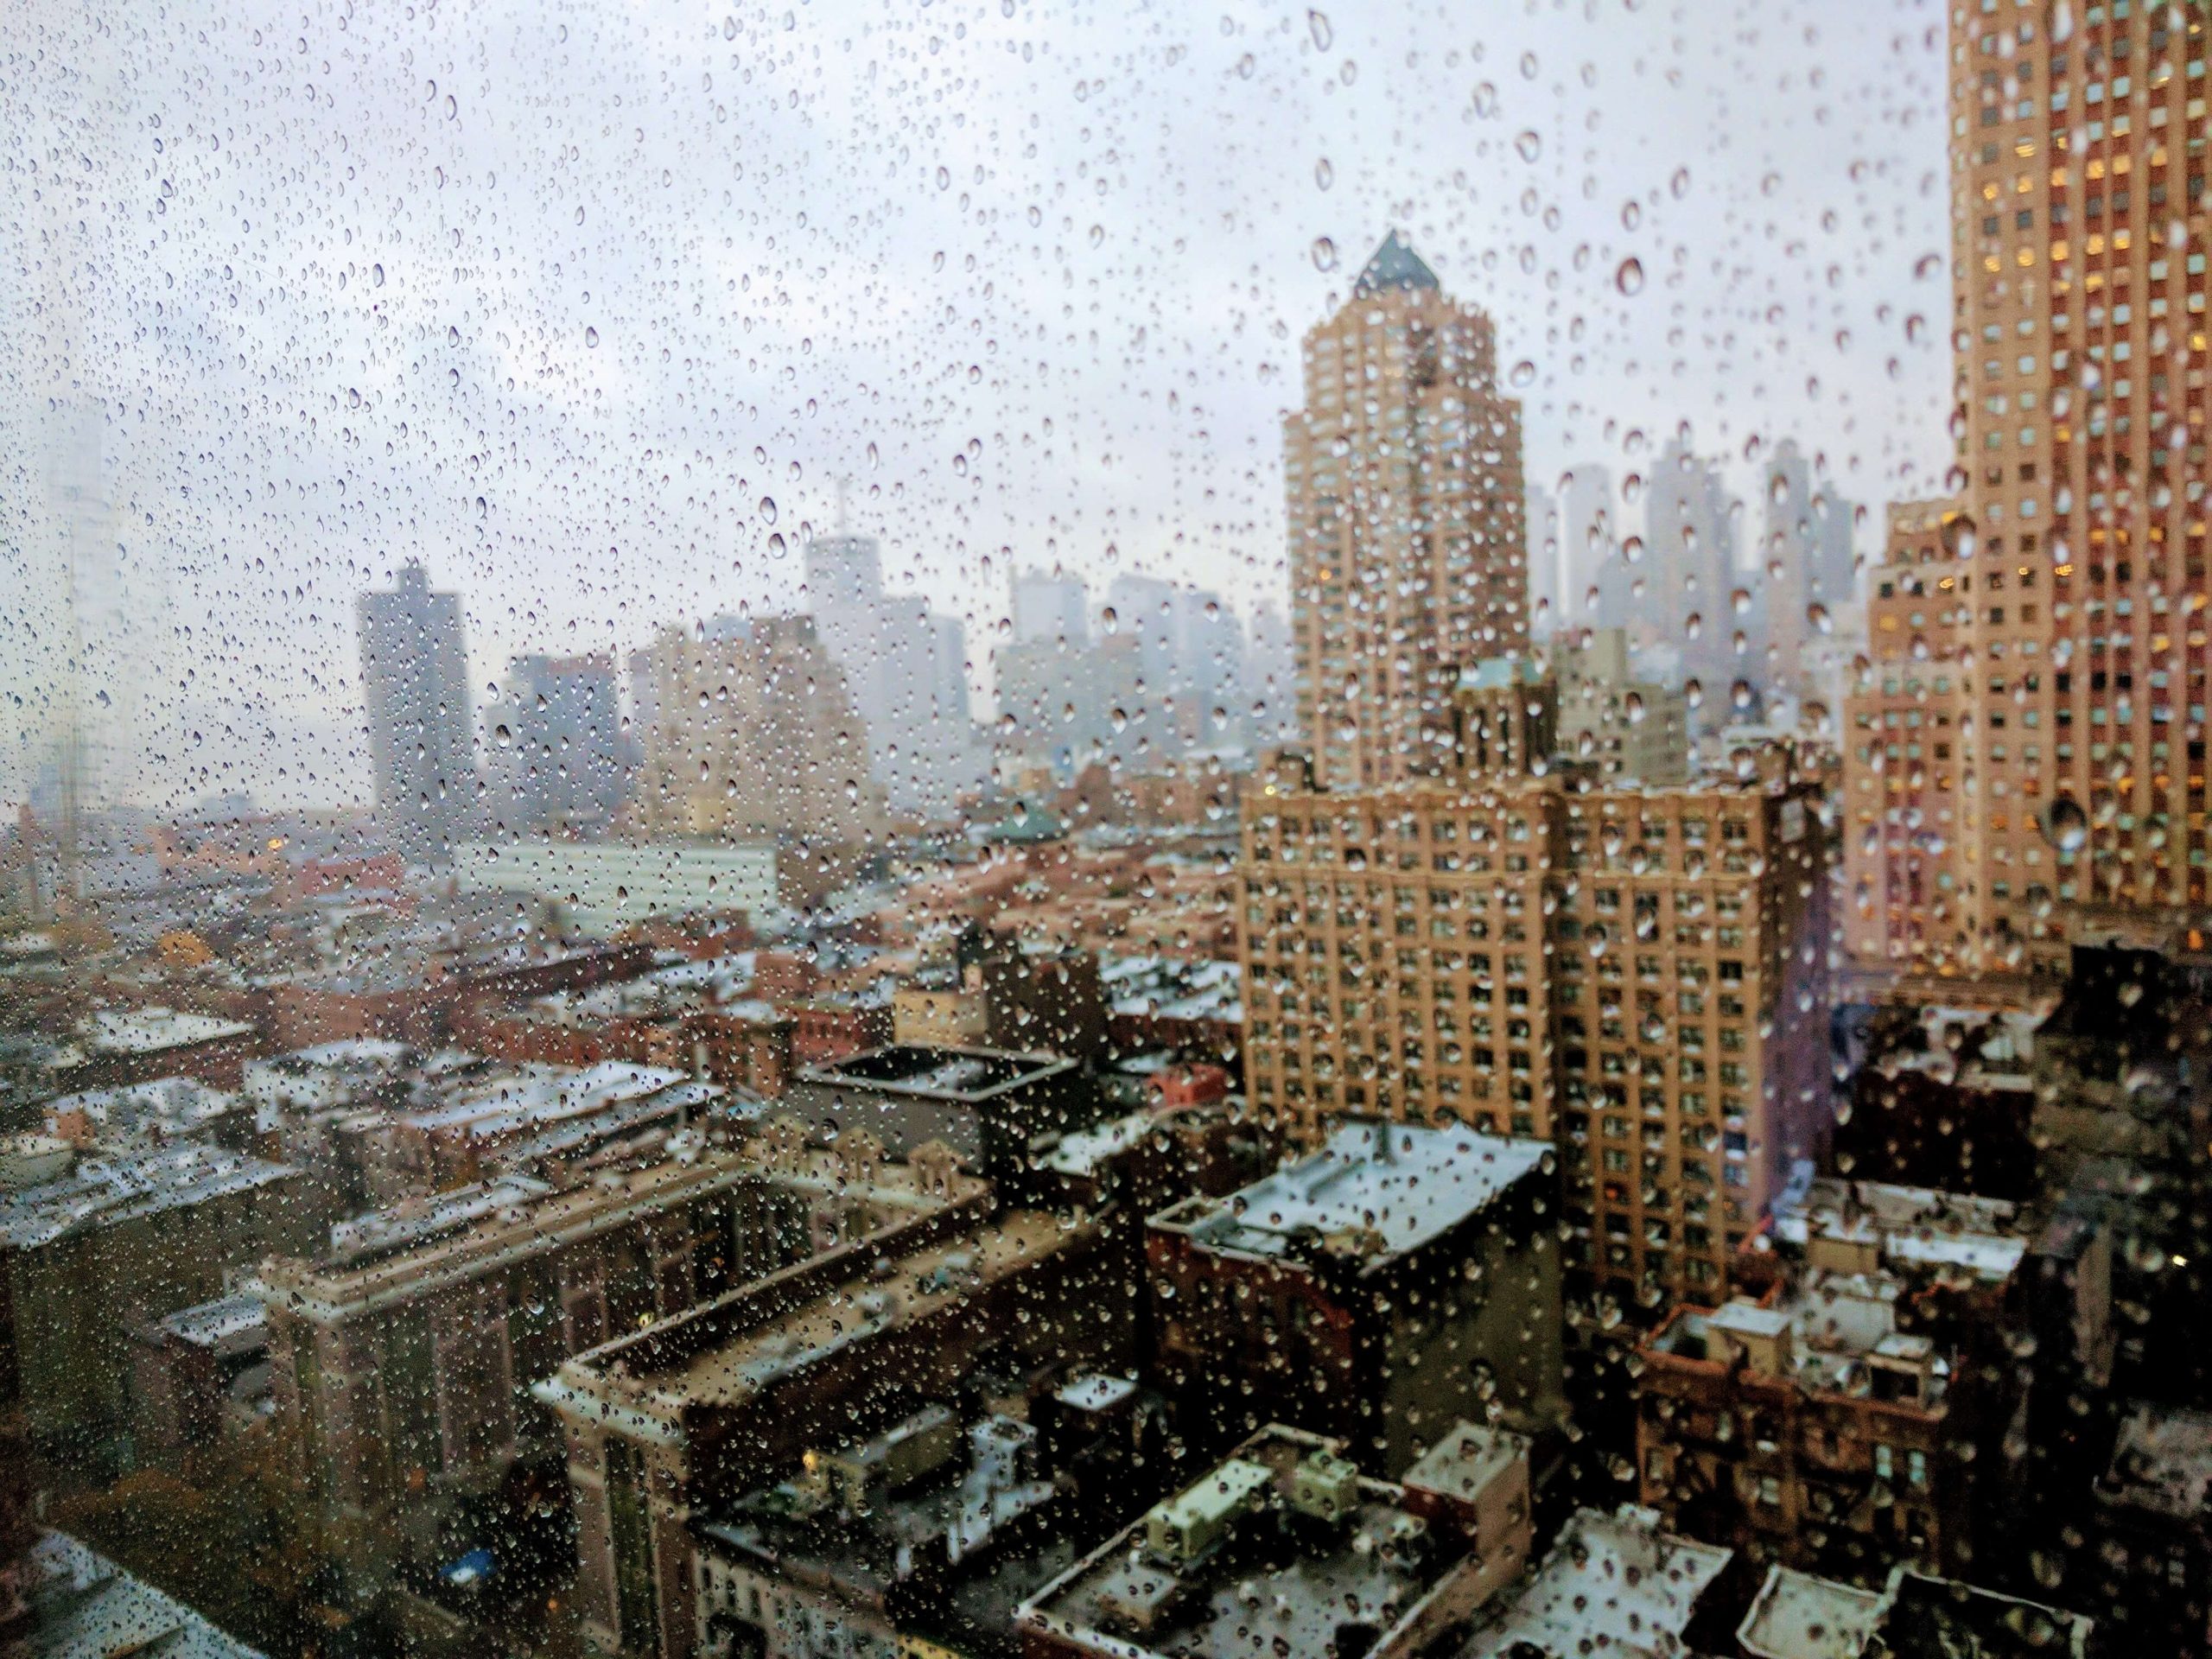 Rainy Day NYC: Indoor Things to Do in New York City